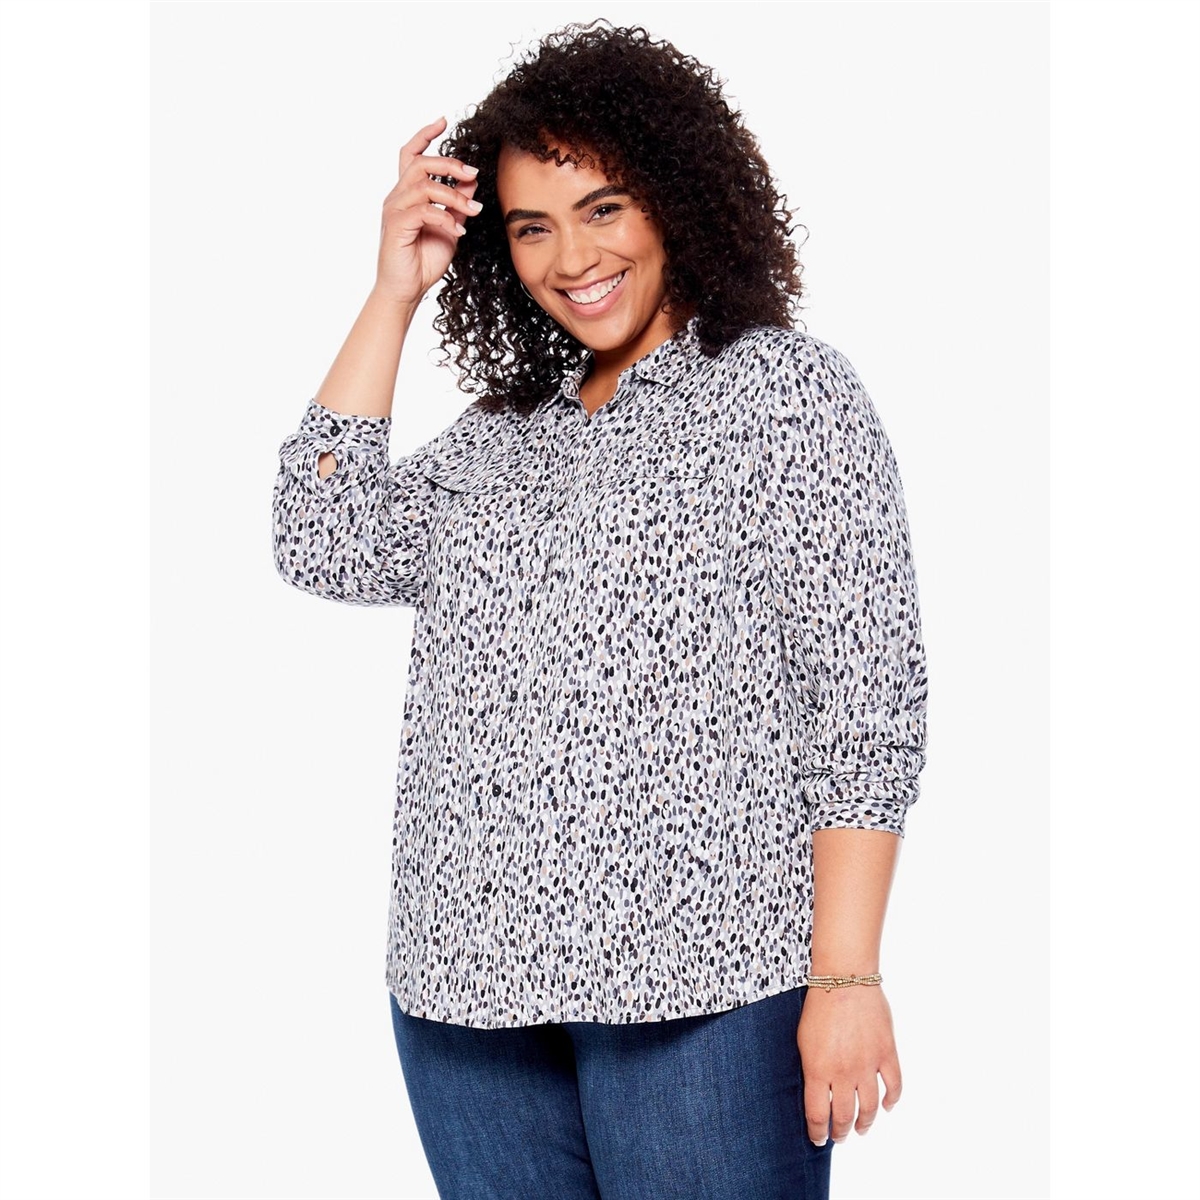 200pc. Overstock Women's PLUS SIZE Clothing from Target stores.